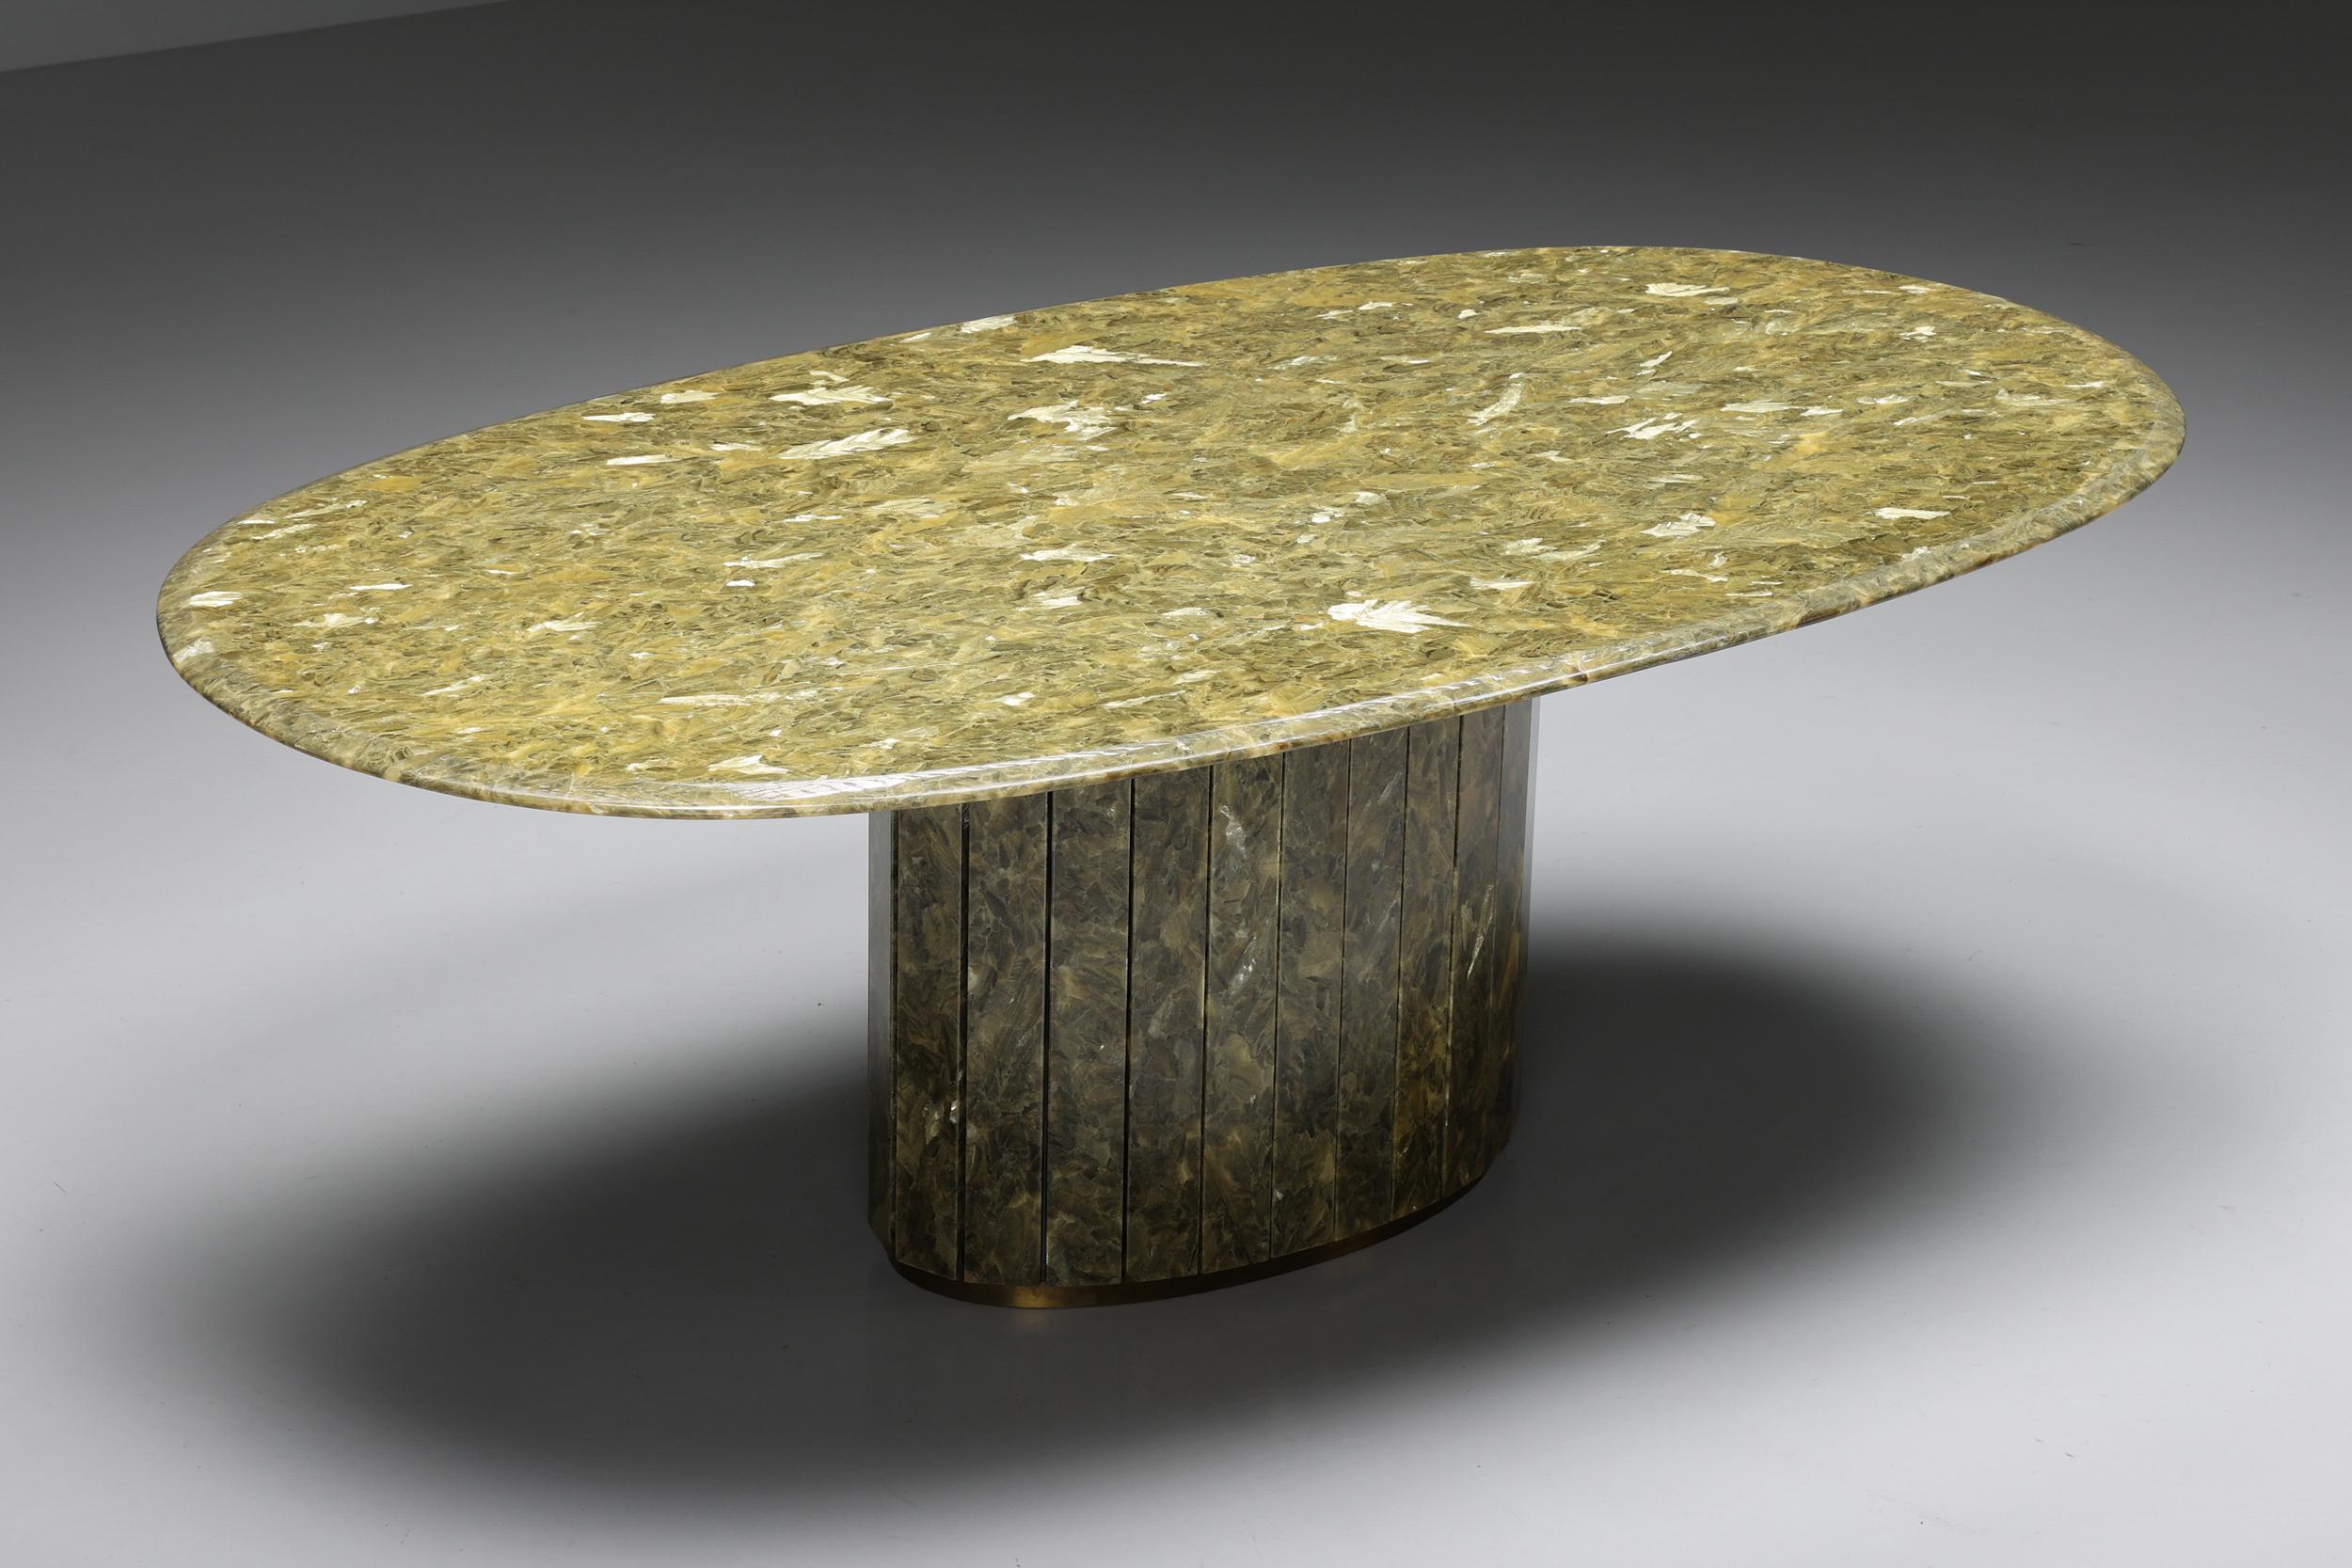 France; Jean Charles; Marble; Onyx; Gold leaf; Hollywood Regency; 1970's

Green onyx marble and brass dining table by Jean Charles. Made in France in the 1970s by a craftsman with an eye for details. The onyx and gold leaf combination make this a